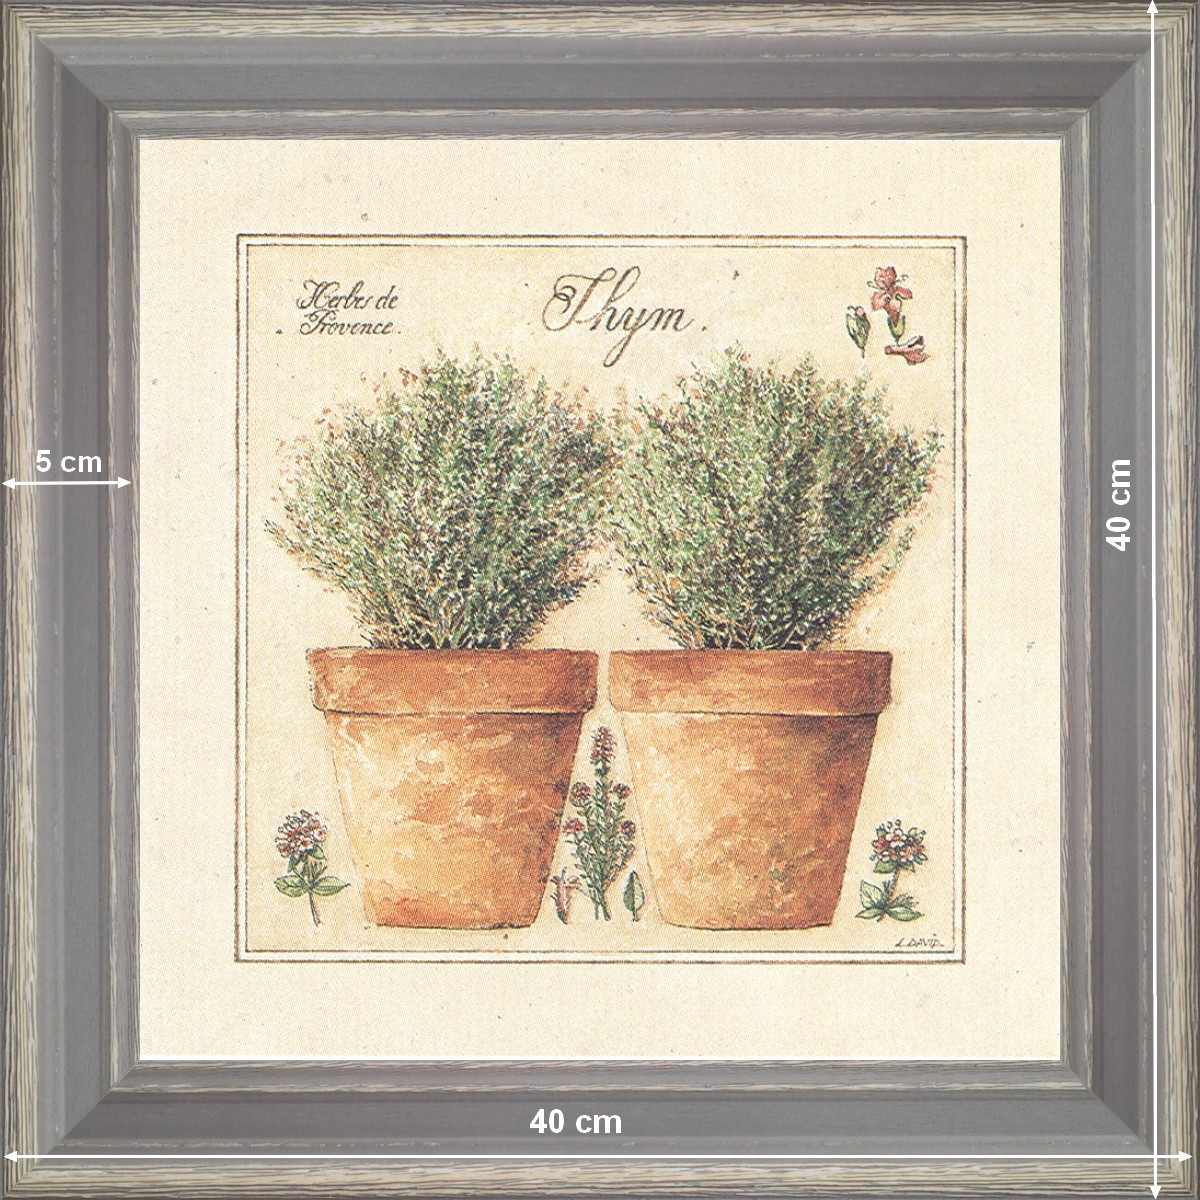 Grass of Provence, Thyme - dimension 40 x 40 cm - Grey